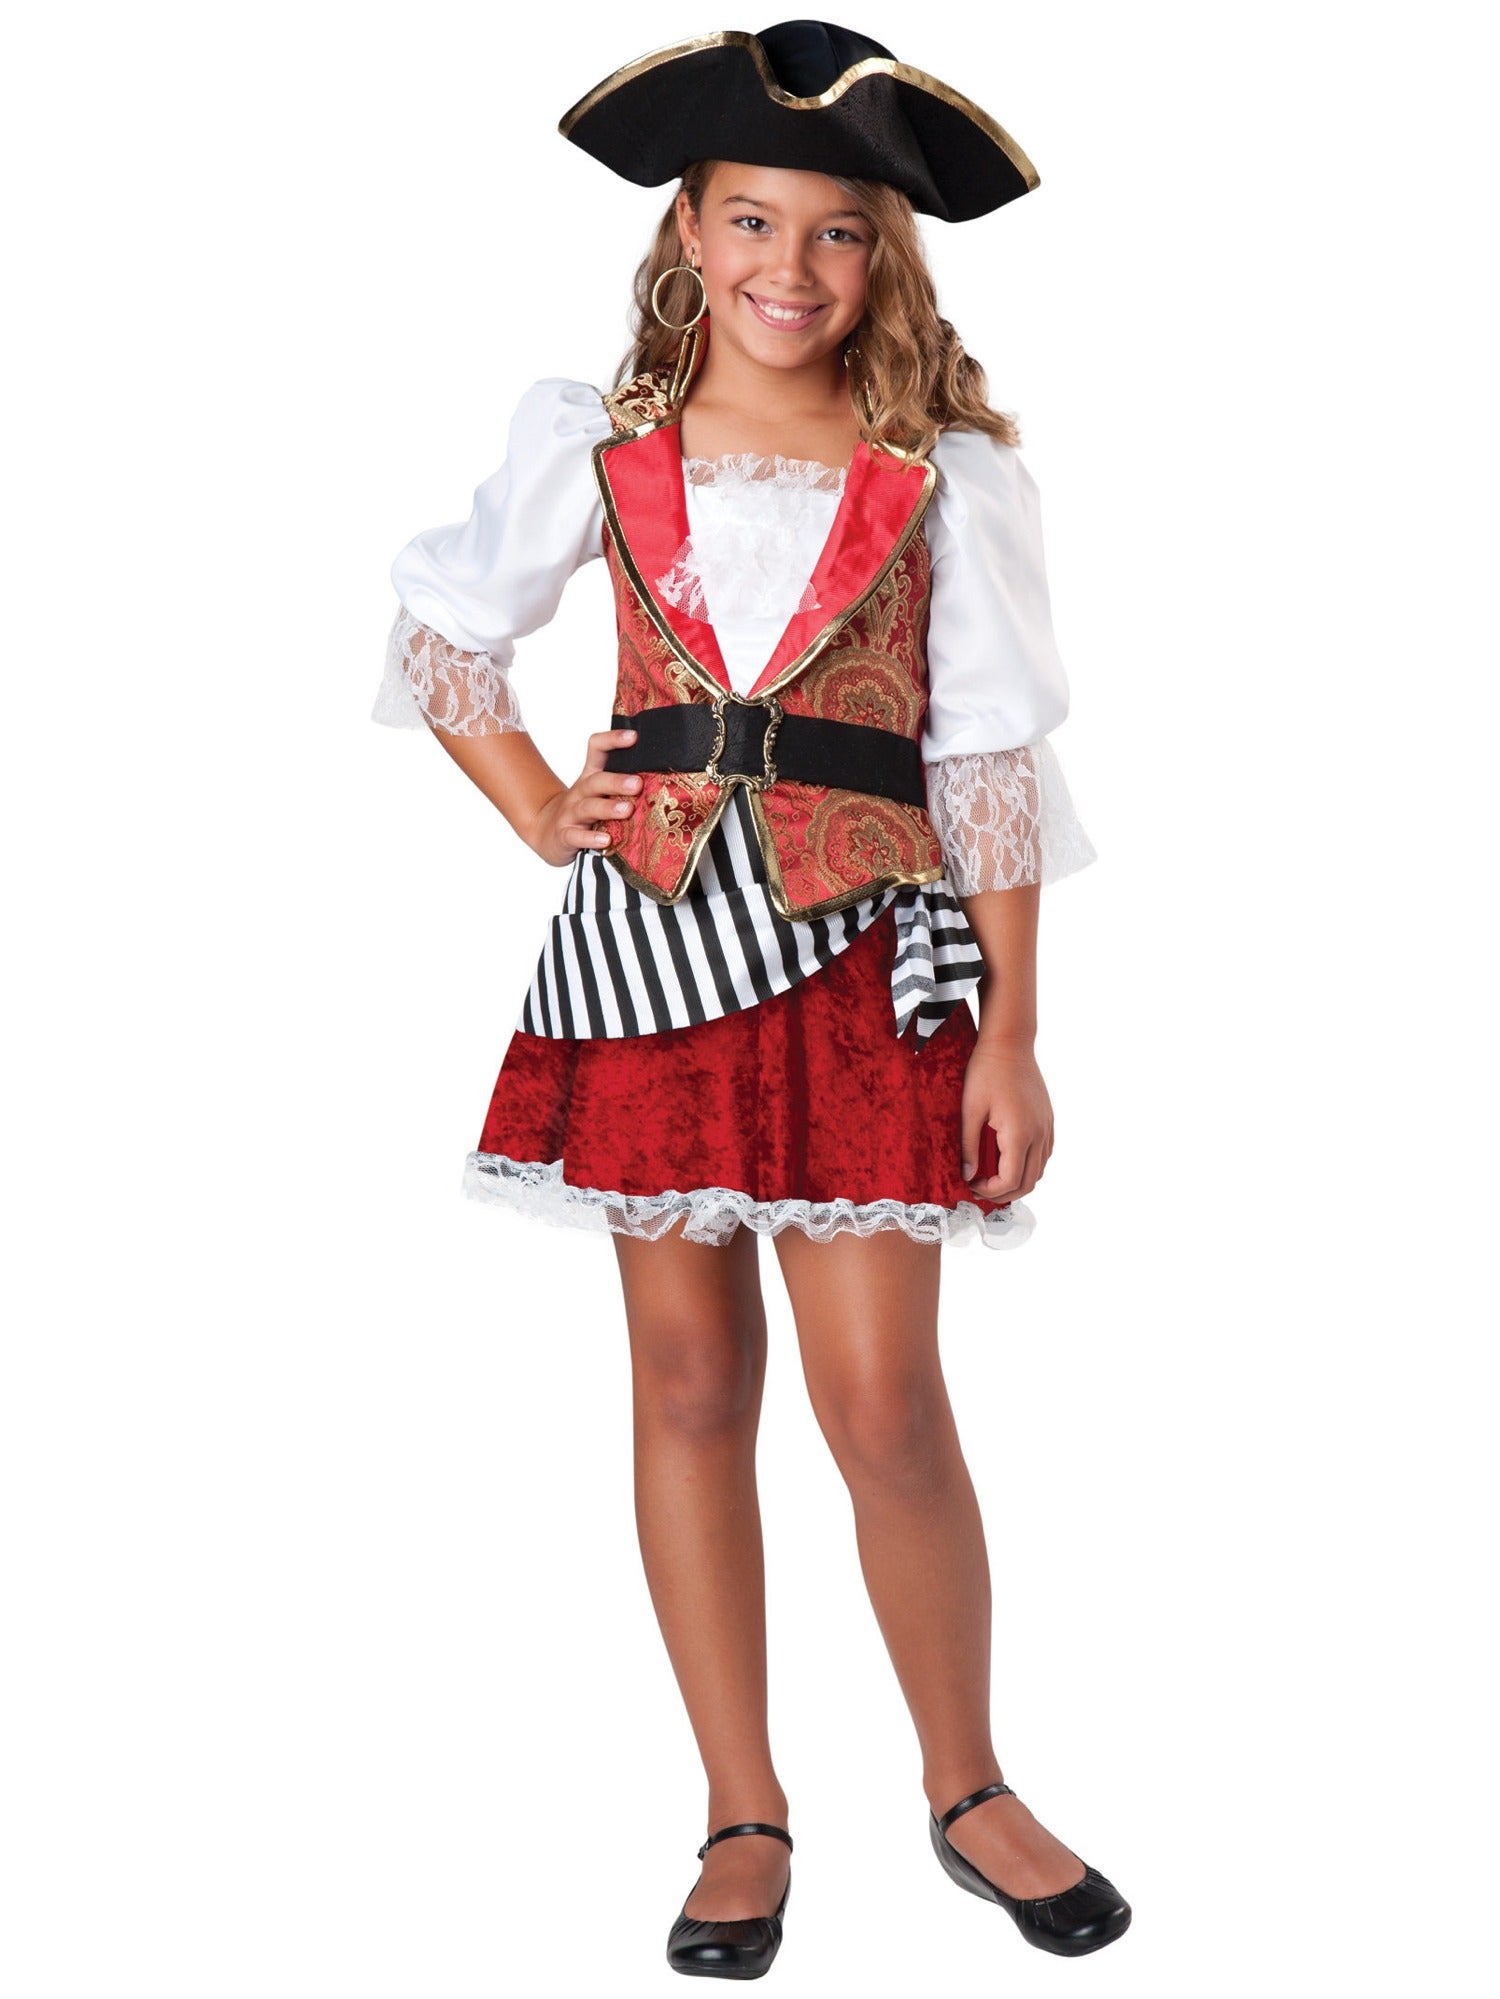 Hobbypos Pretty Pirate of the Carribbean Buccaneer Child Girls Costume